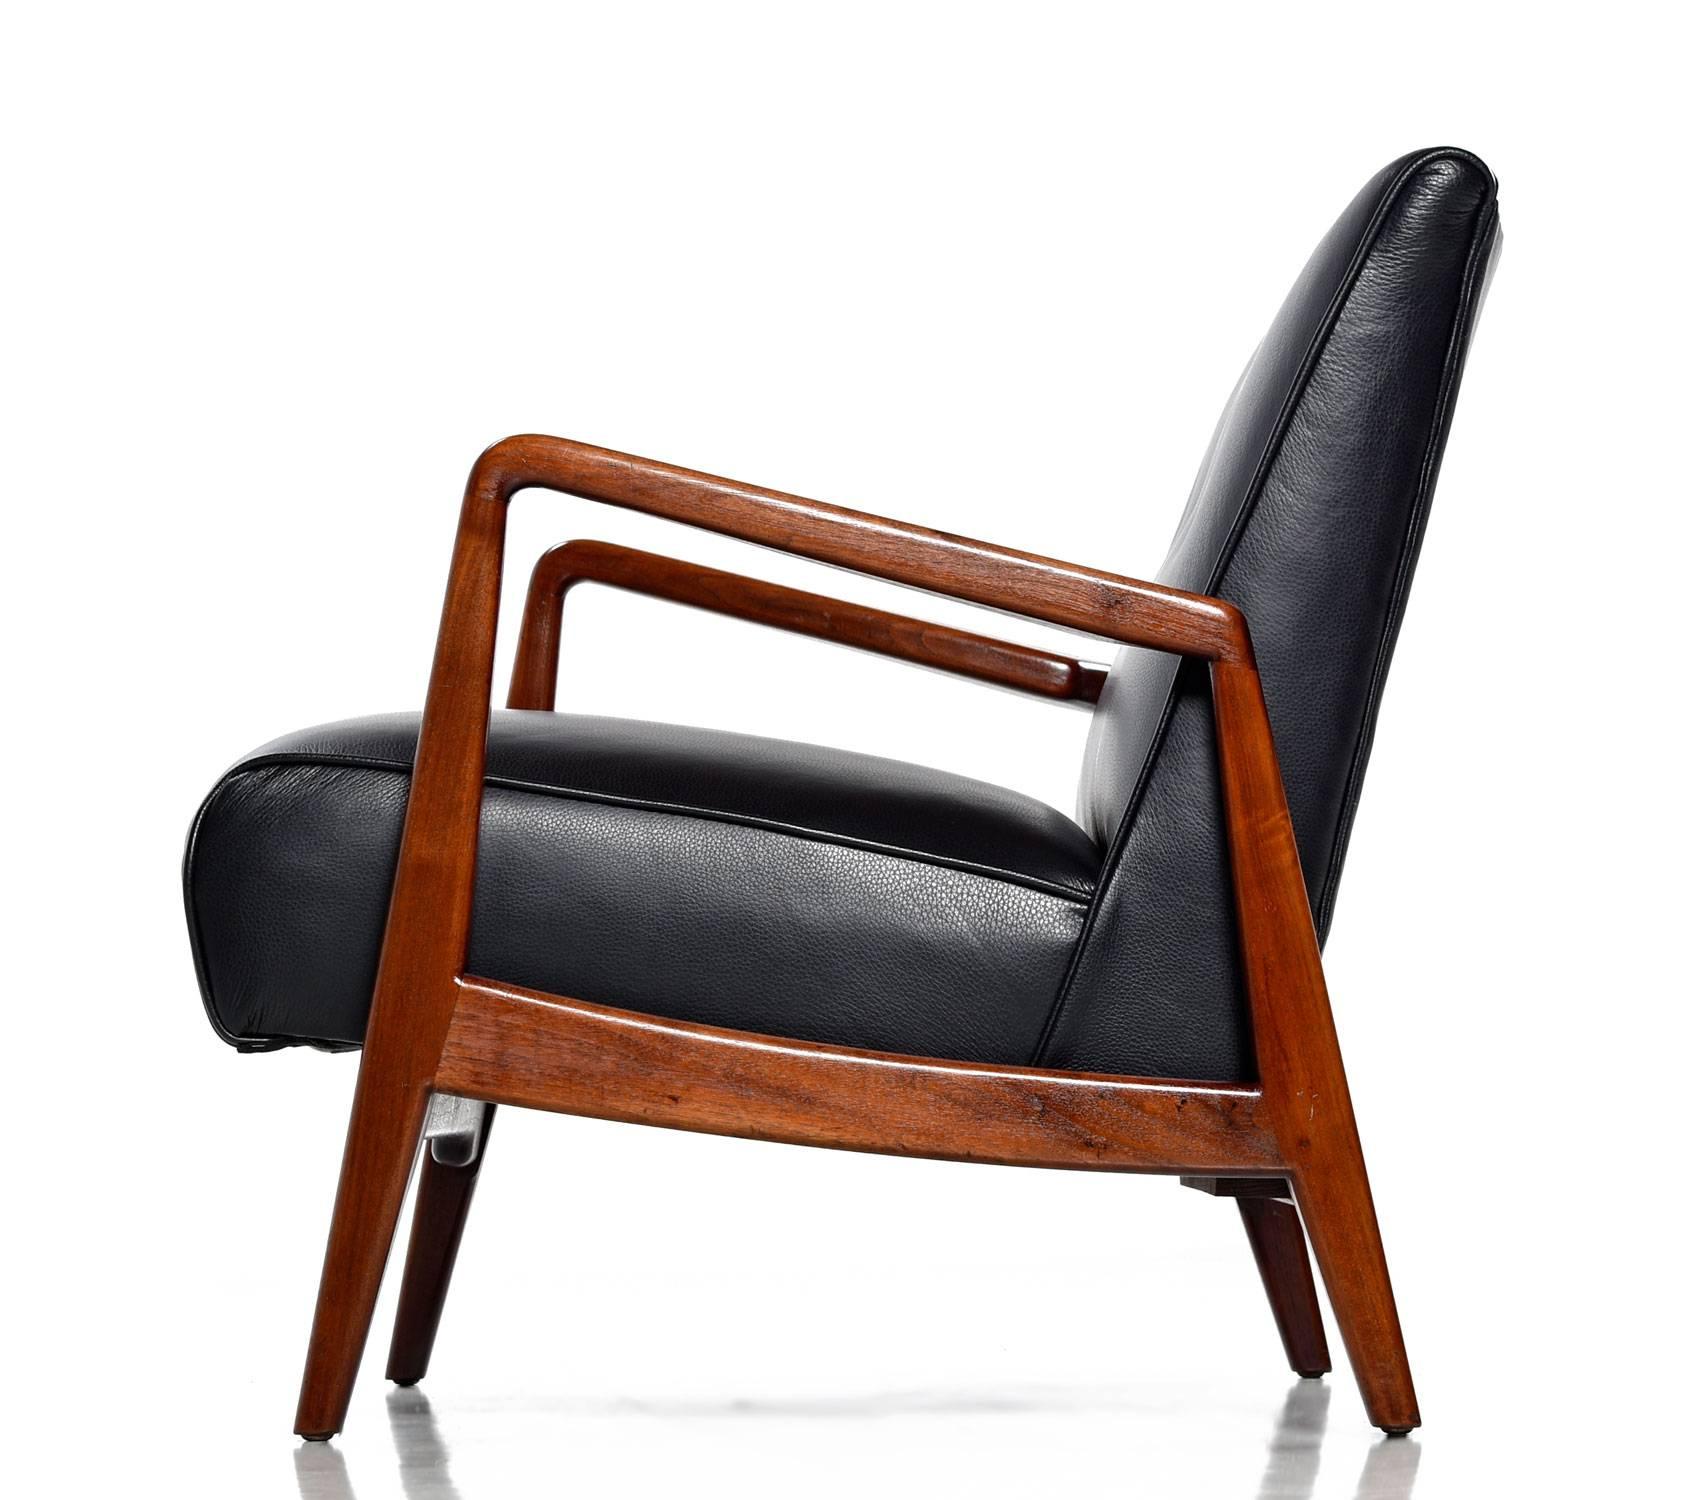 Beautifully restored Mid-Century Modern Jens Risom walnut armchair with new full grain black leather upholstery. The sleek design shows strong influence from Risom's native, Denmark. View from the side, back or front to admire its architectural